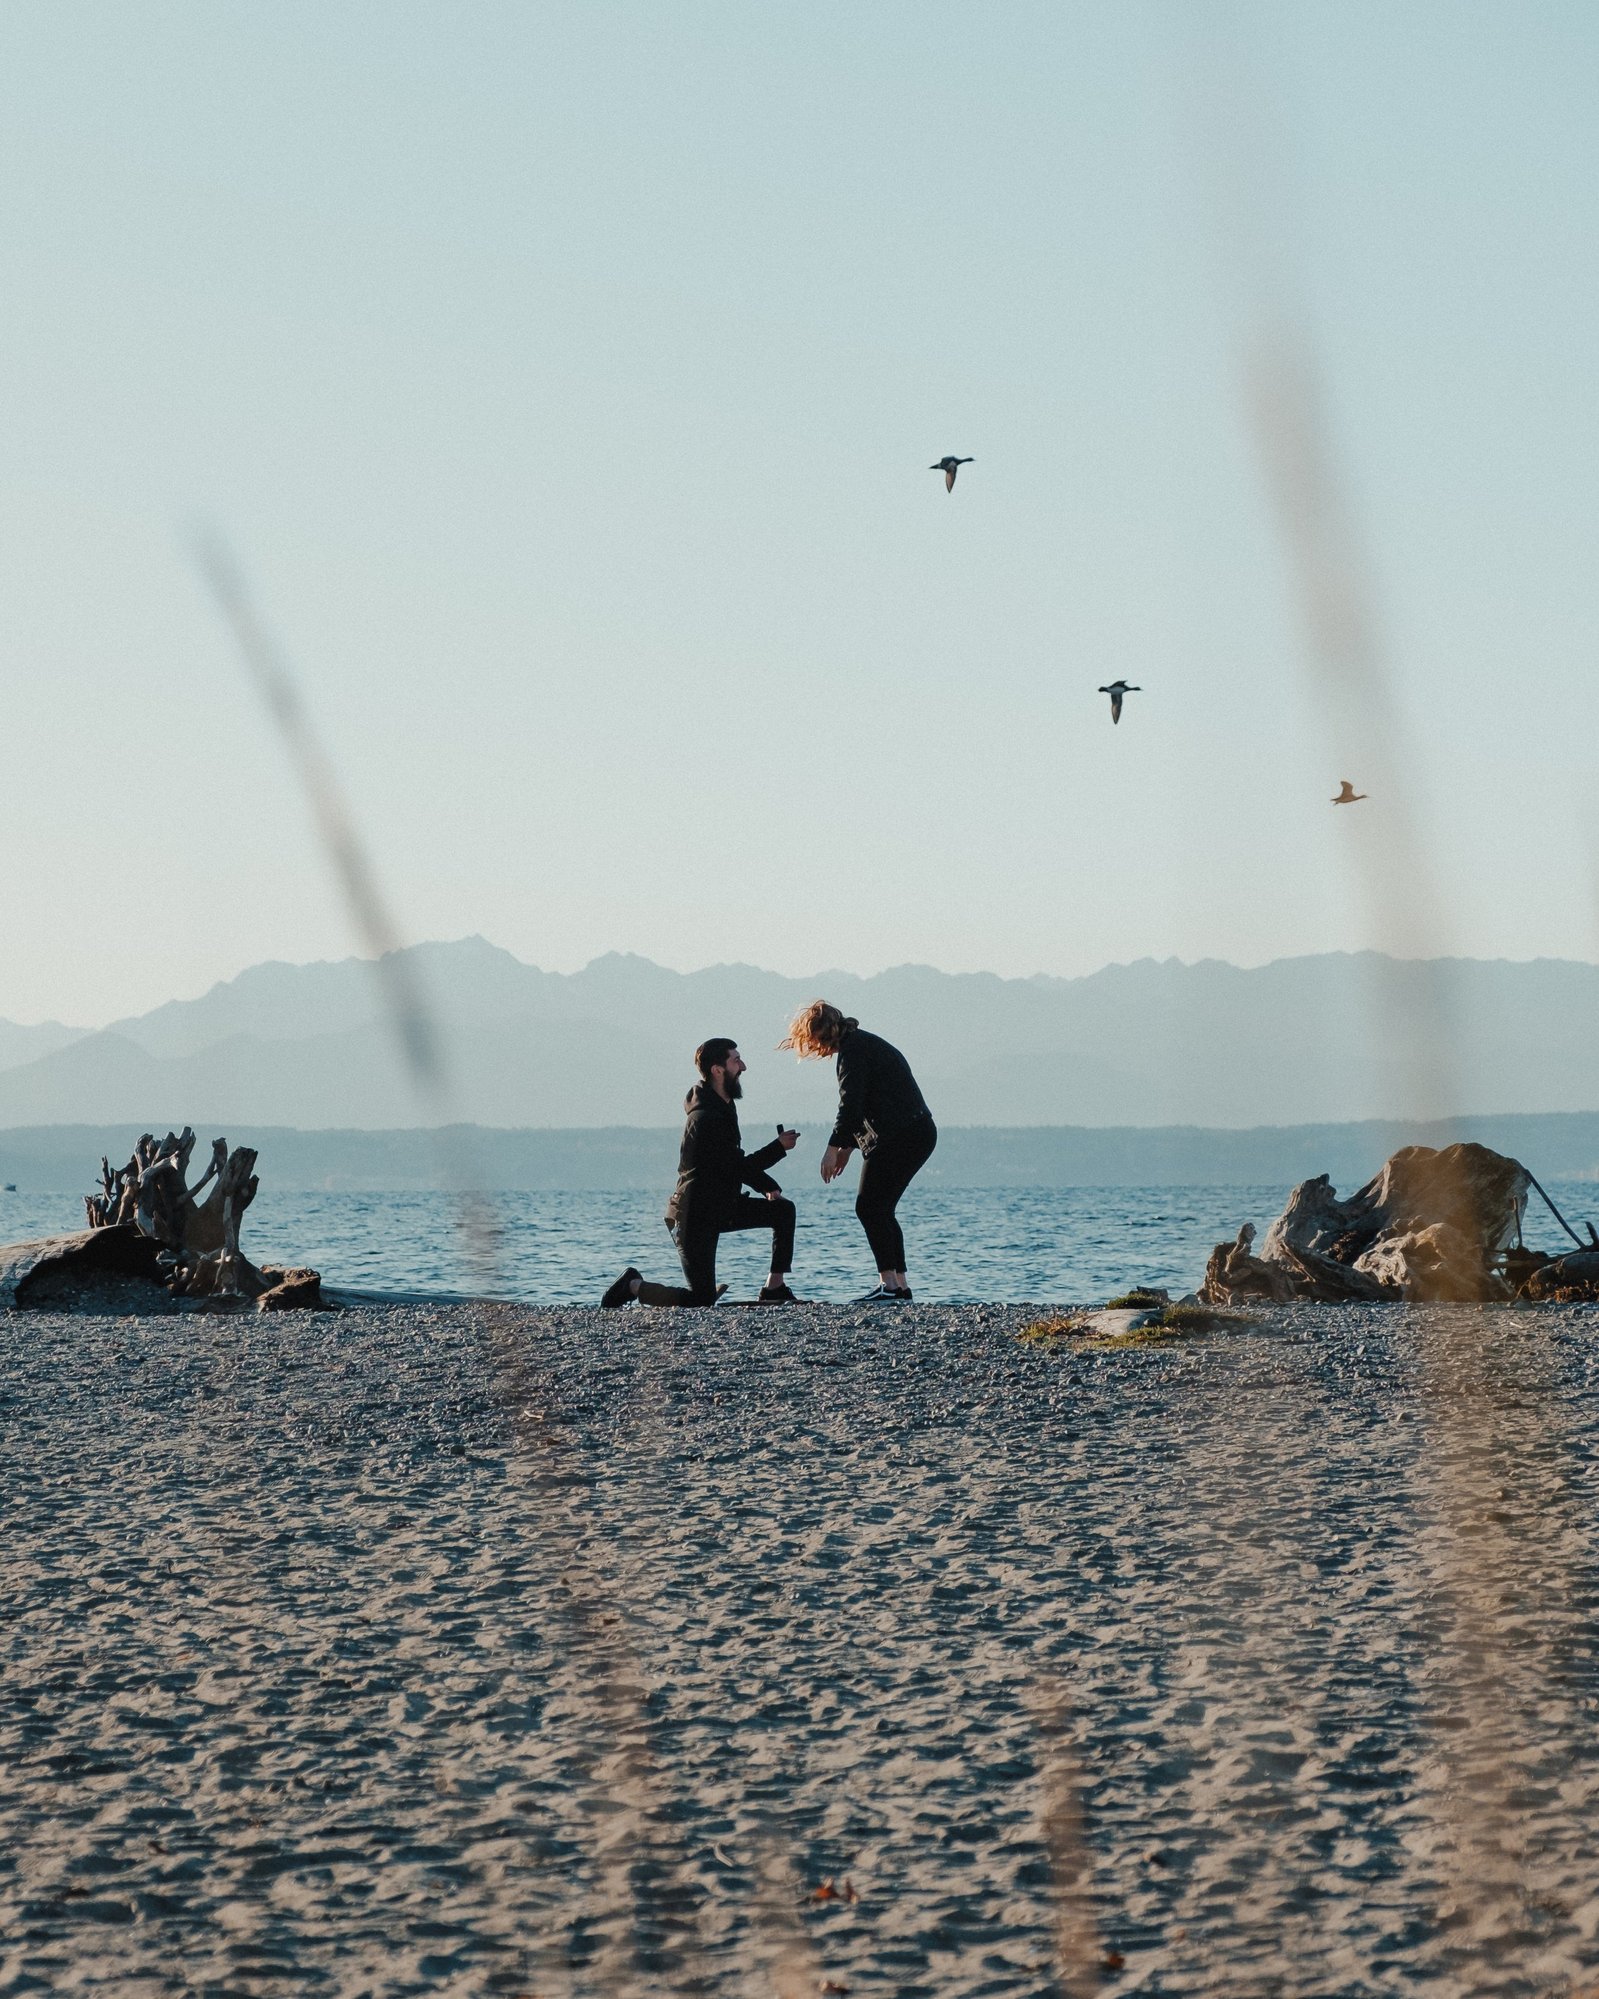 Birds fly behind a marriage proposal, captured conspicuously by a hidden photographer, at Carkeek Park in Seattle, Washington